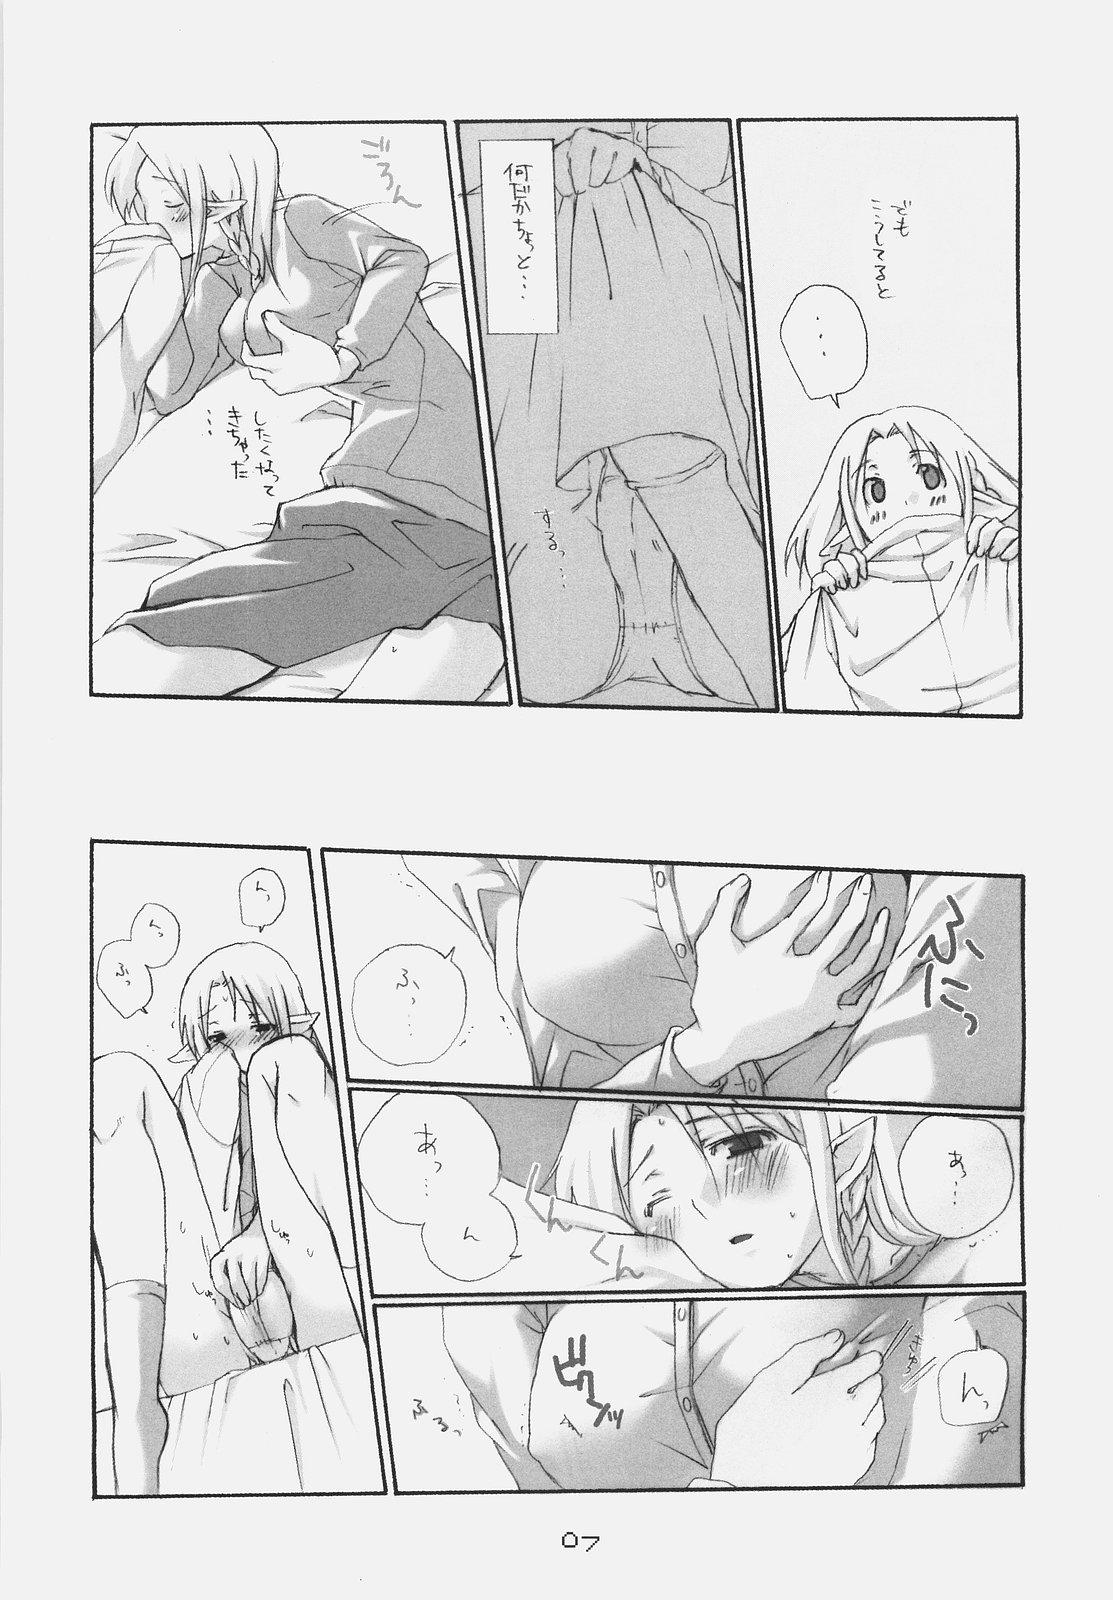 Free Blowjobs SKB - Fate stay night Boobs - Page 6